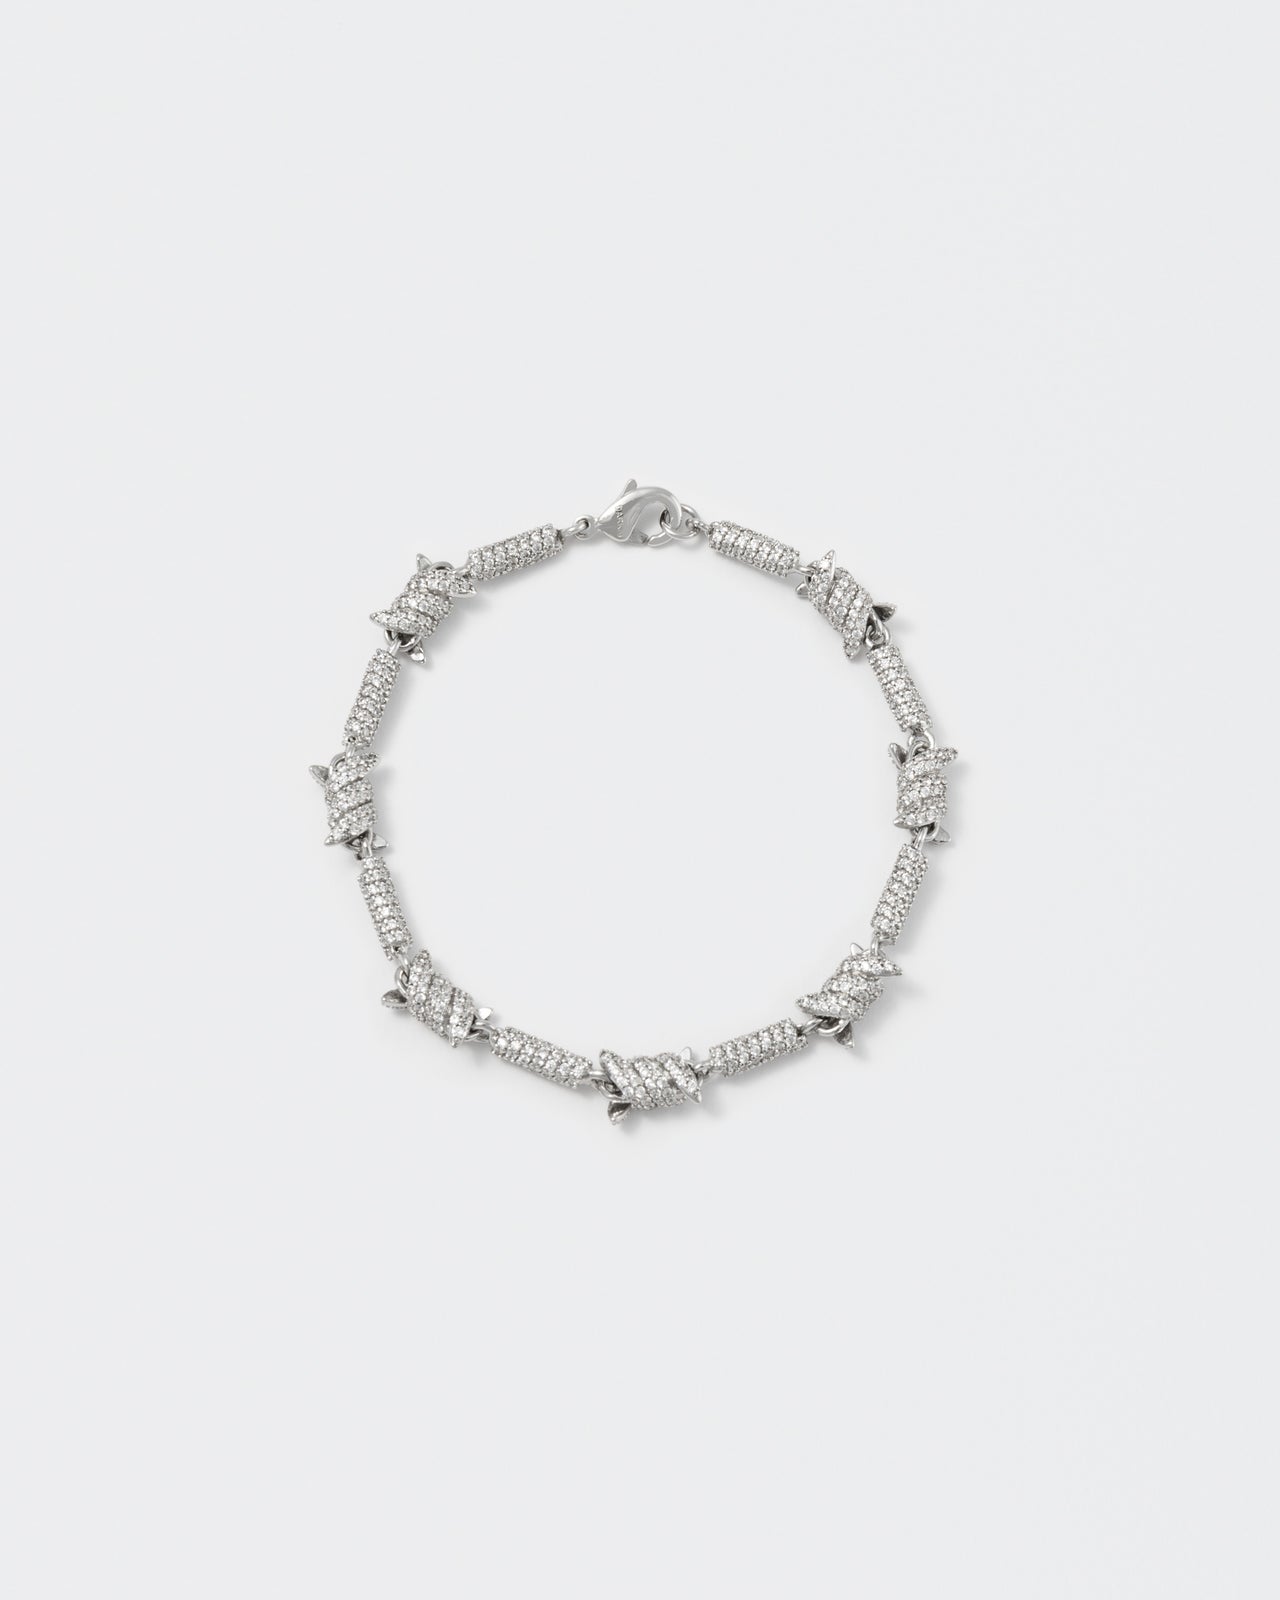 Barbed Wire bracelet with 18kt white gold coating and hand-set micropavé stones in diamond white. Lobster clasp closure with logo